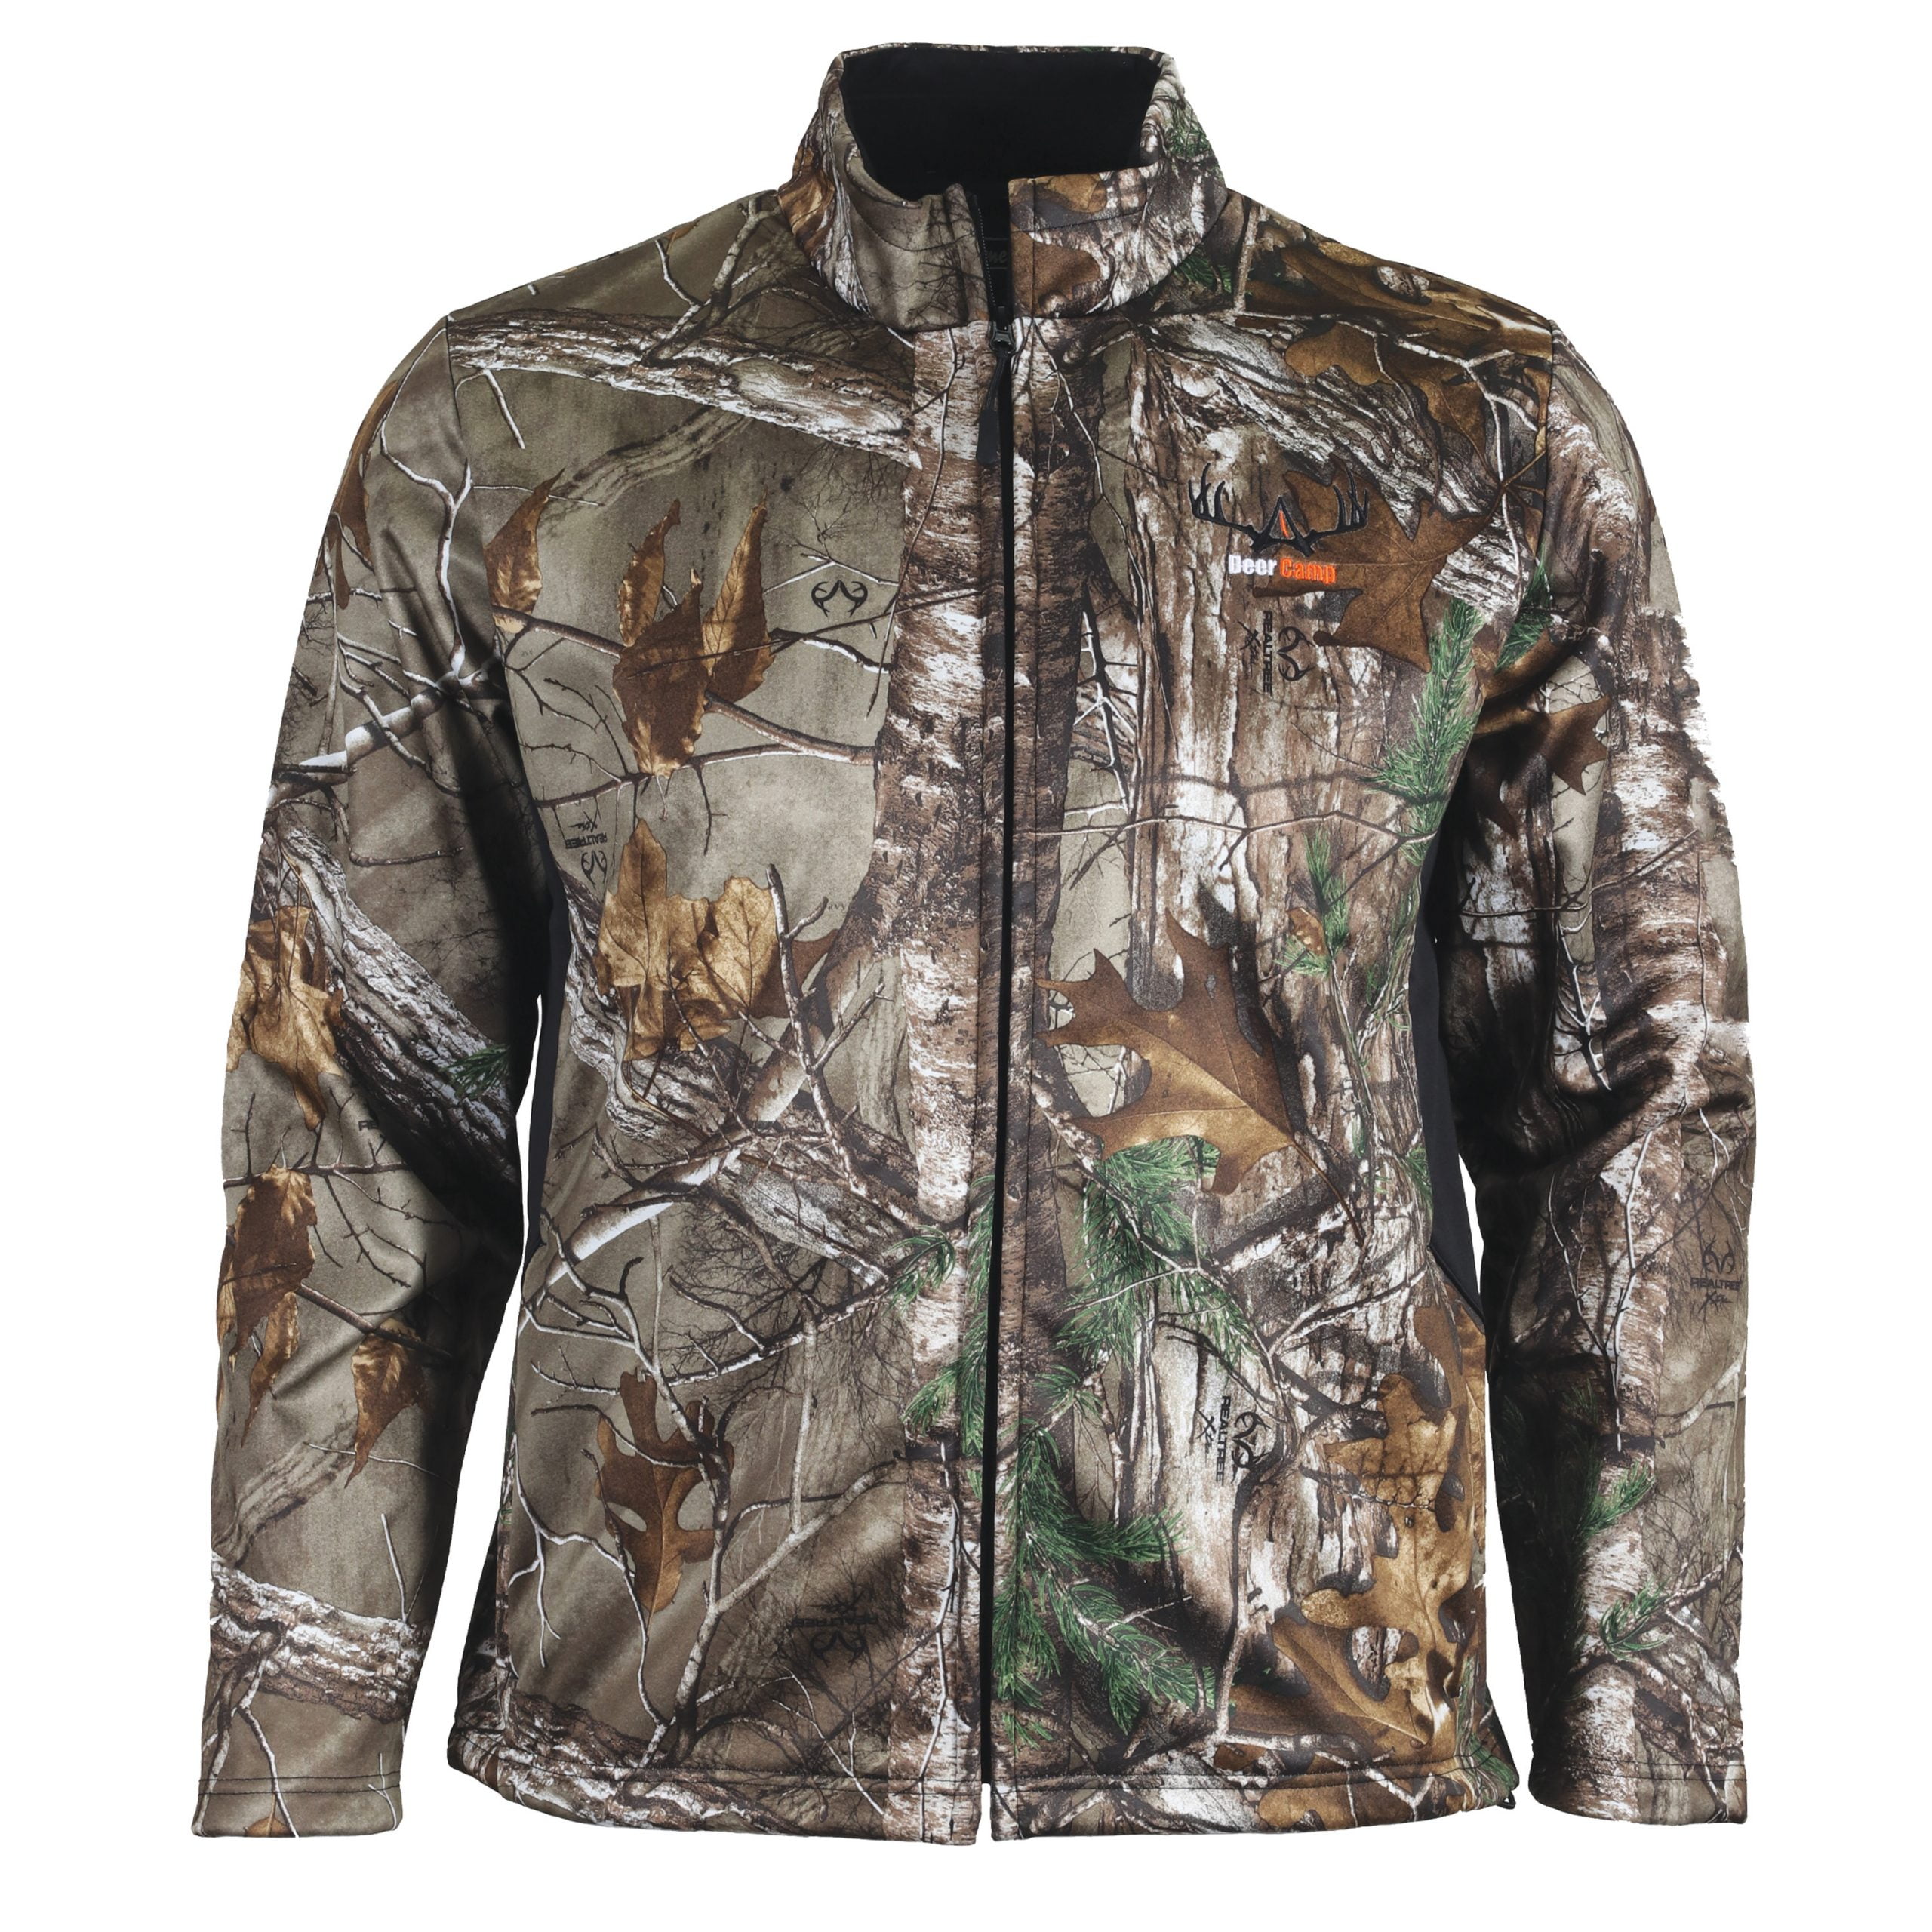 Gamehide Deer Camp Clothing Jacket Soft Shell Realtree Camo - XL ...